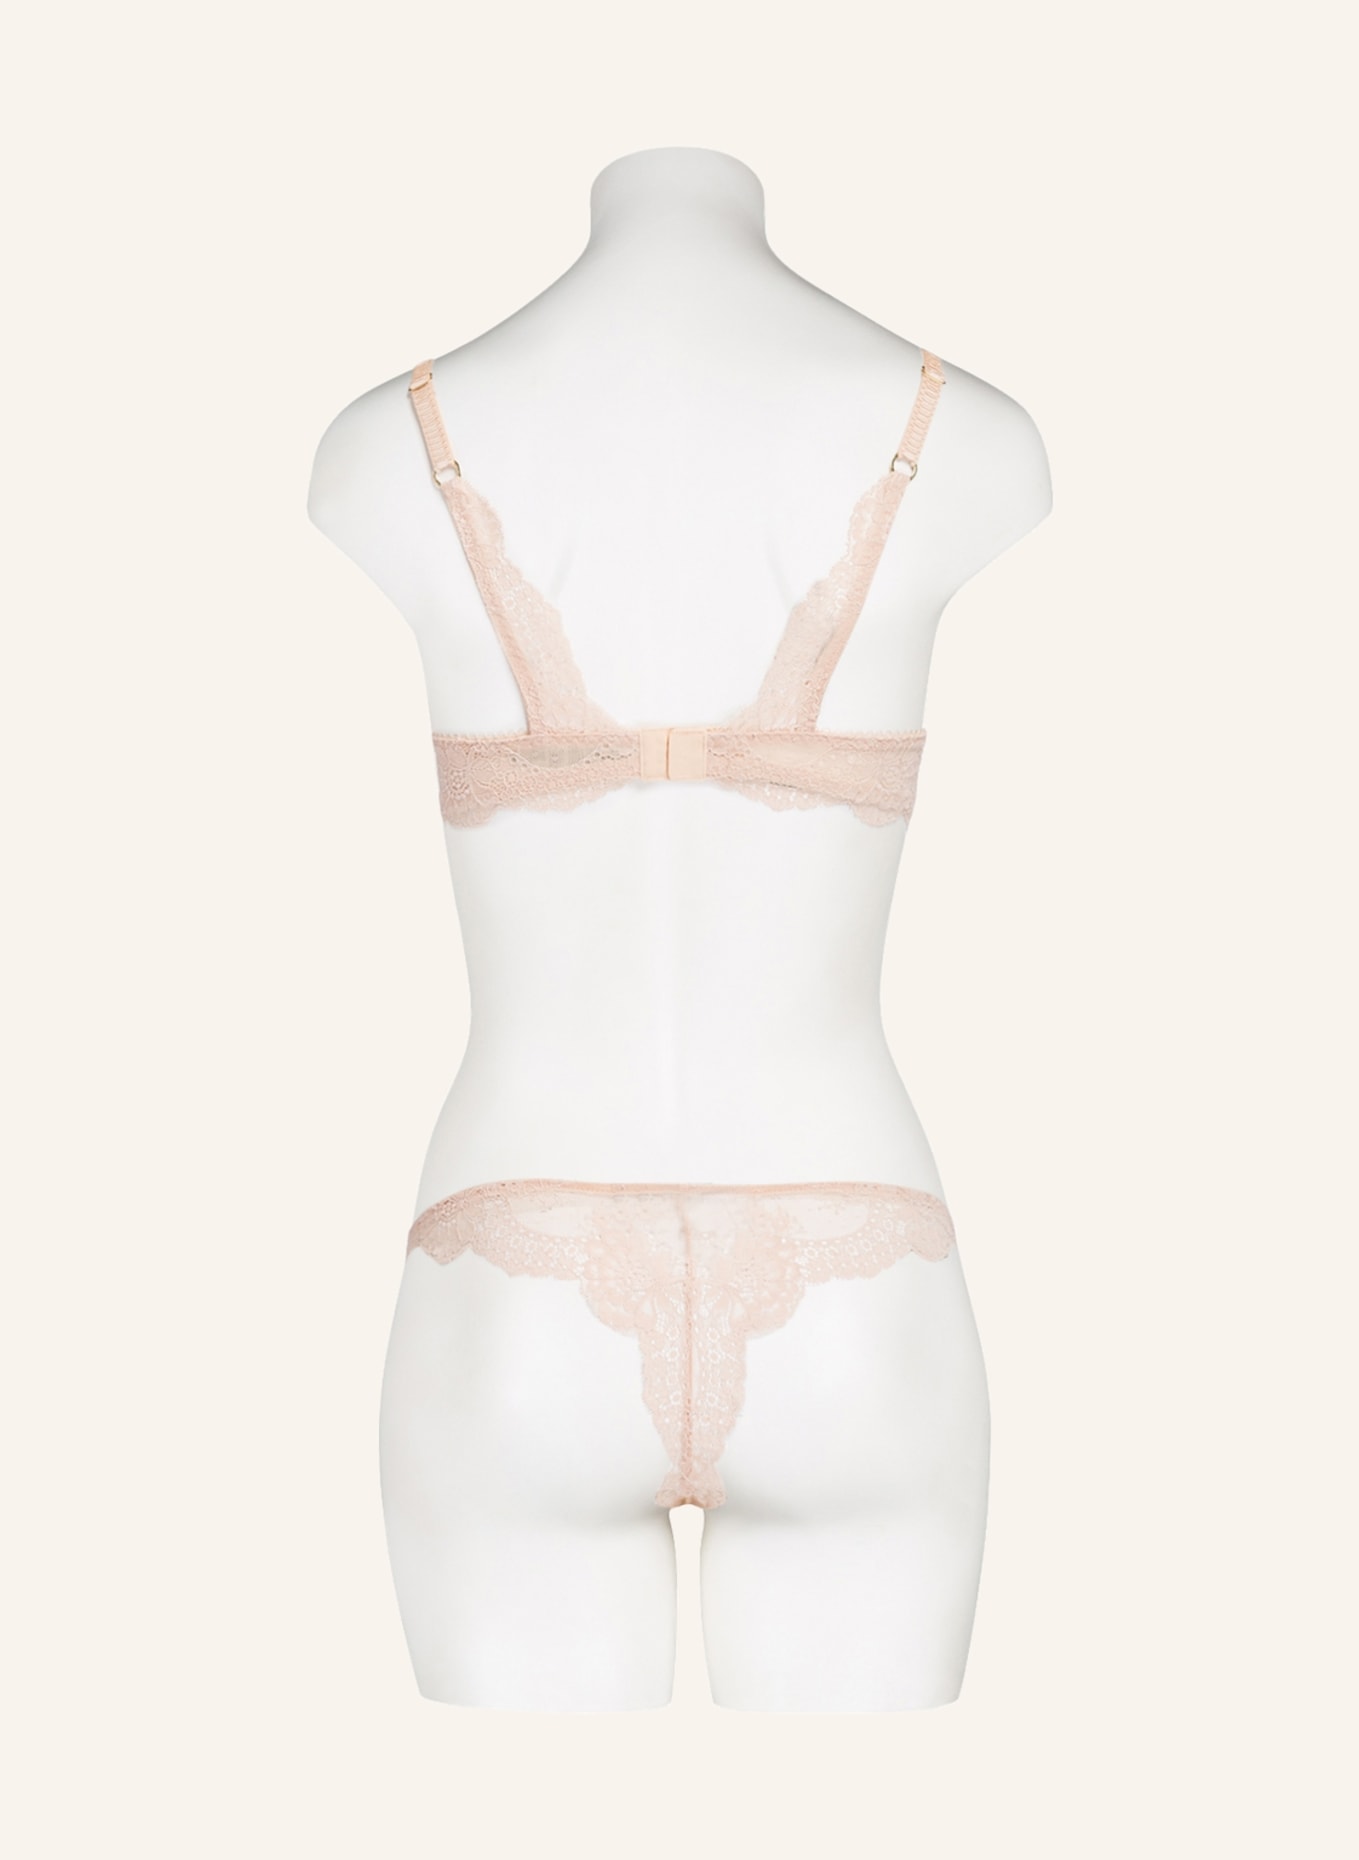 STELLA McCARTNEY LINGERIE  Push-up bra SMOOTH & LACE, Color: NUDE (Image 3)